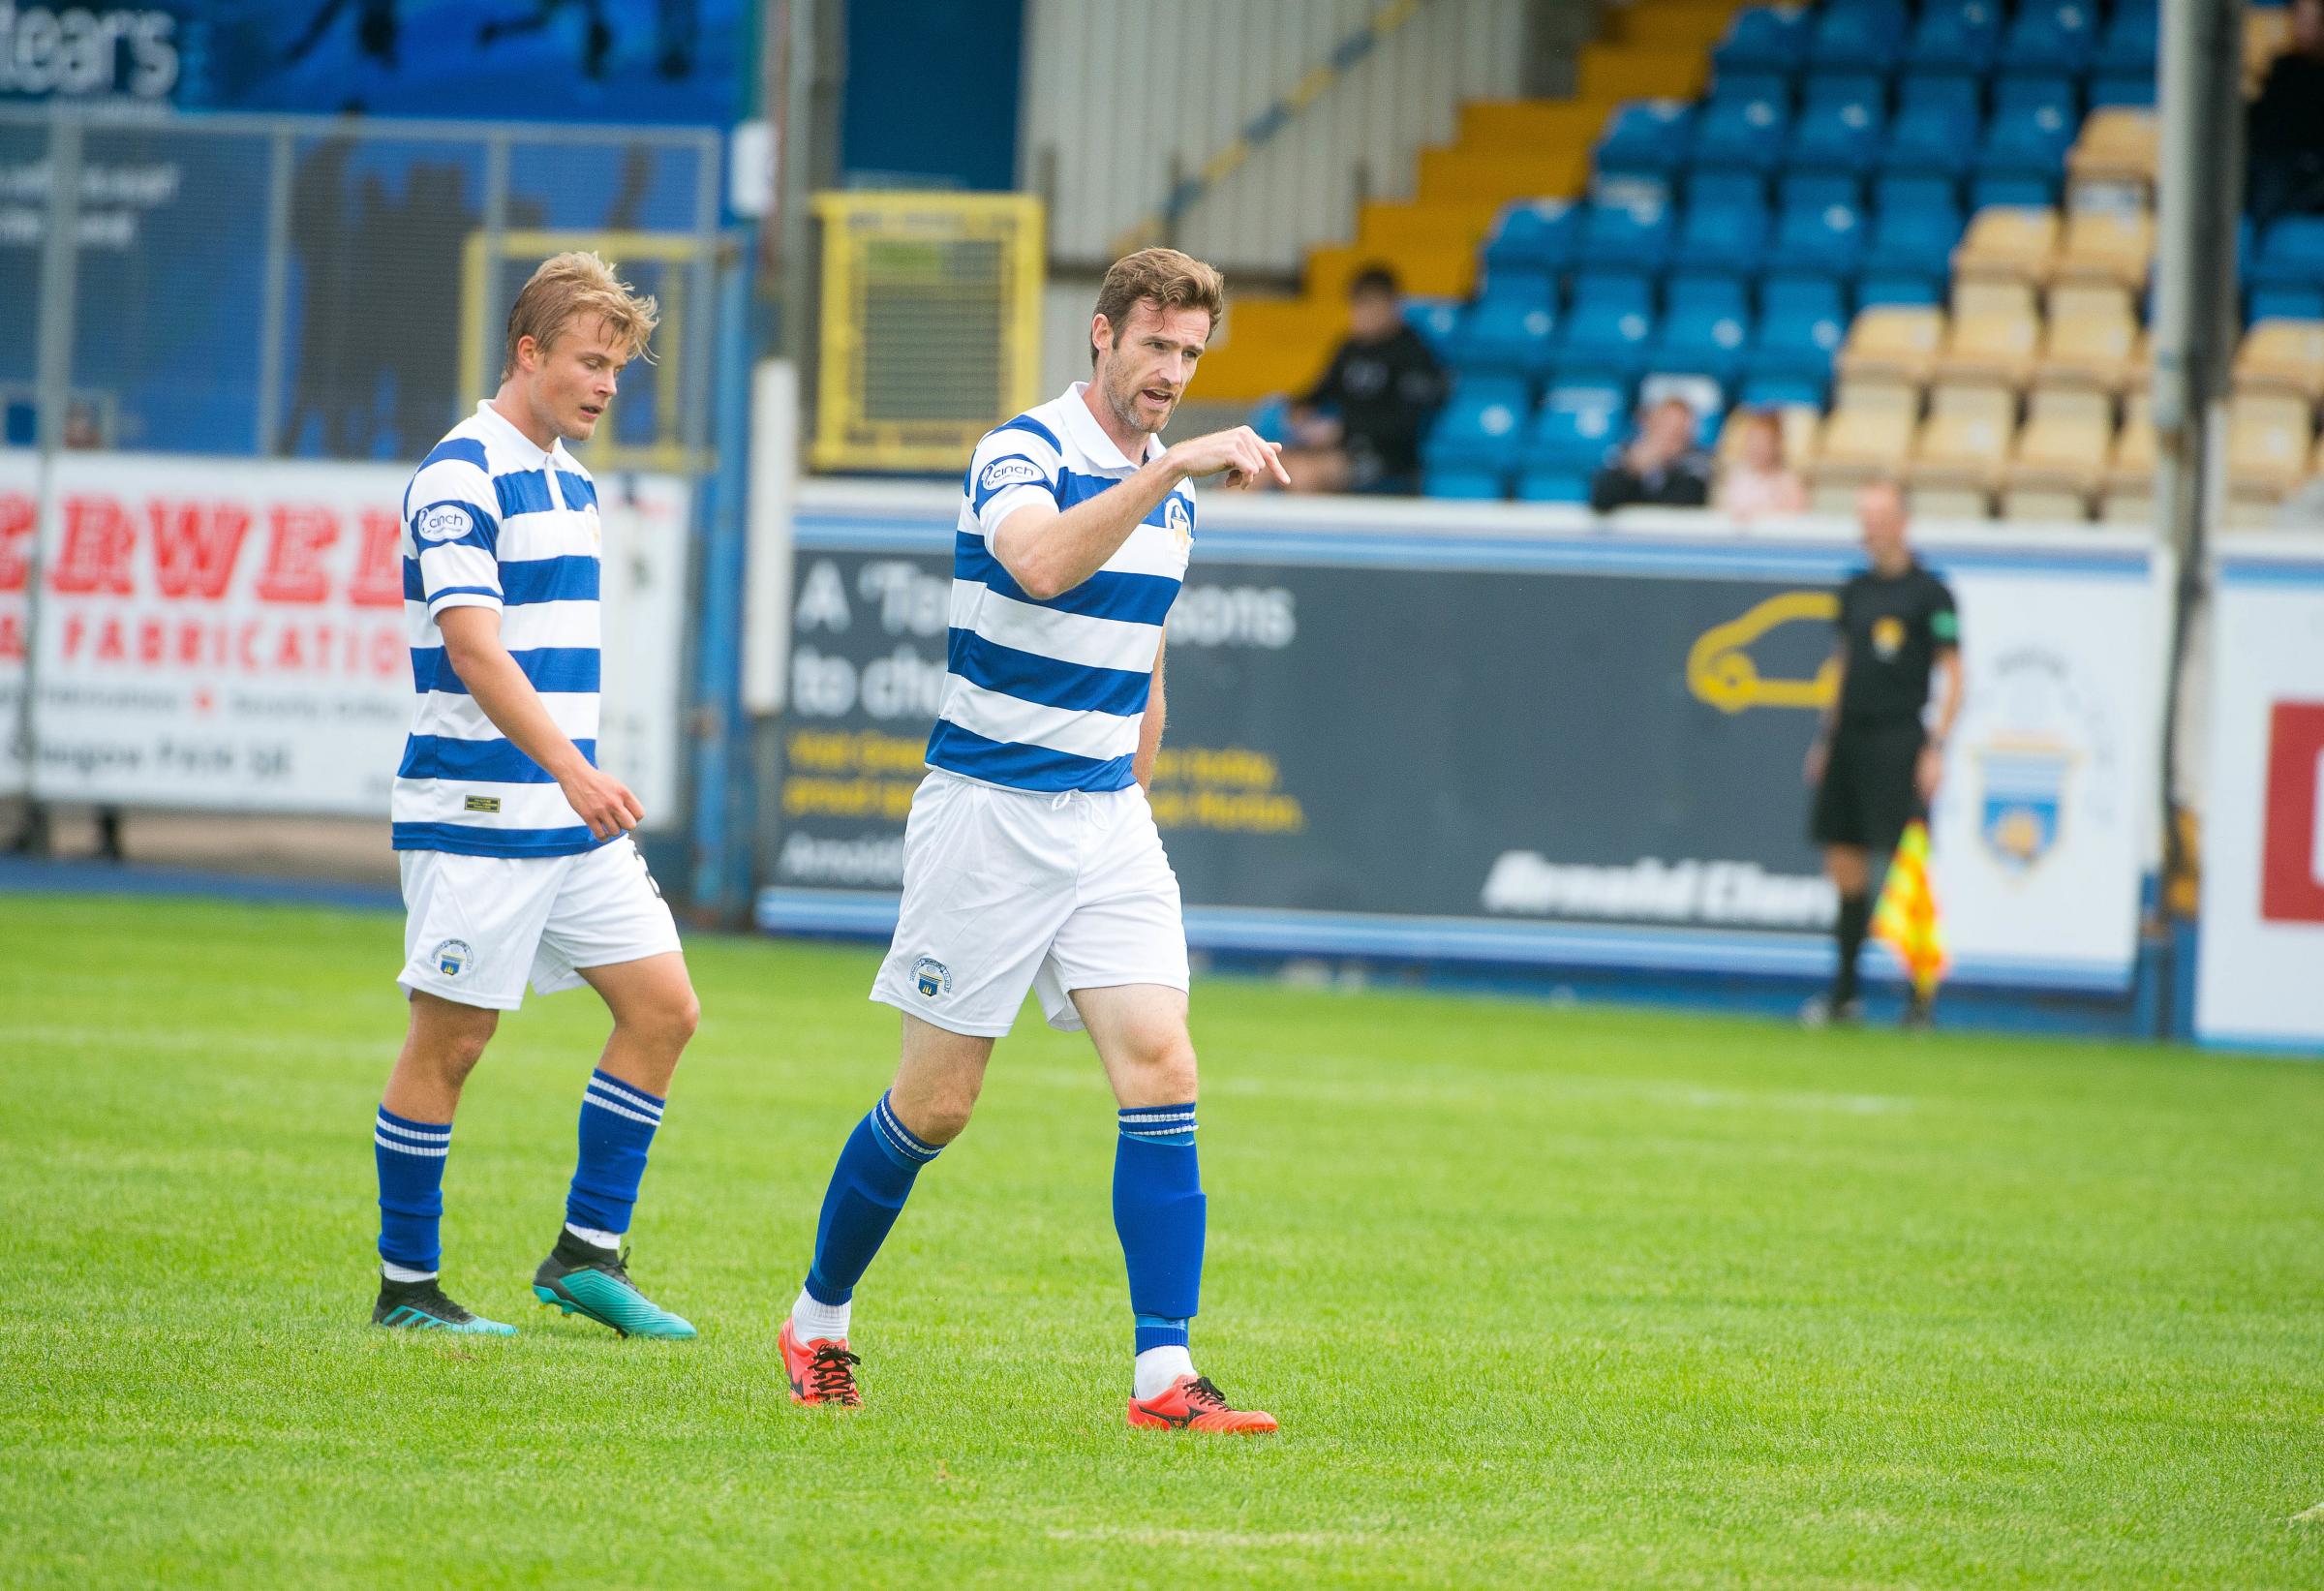 Ex-Morton defender Brian McLean will go all out to cause shock against old club